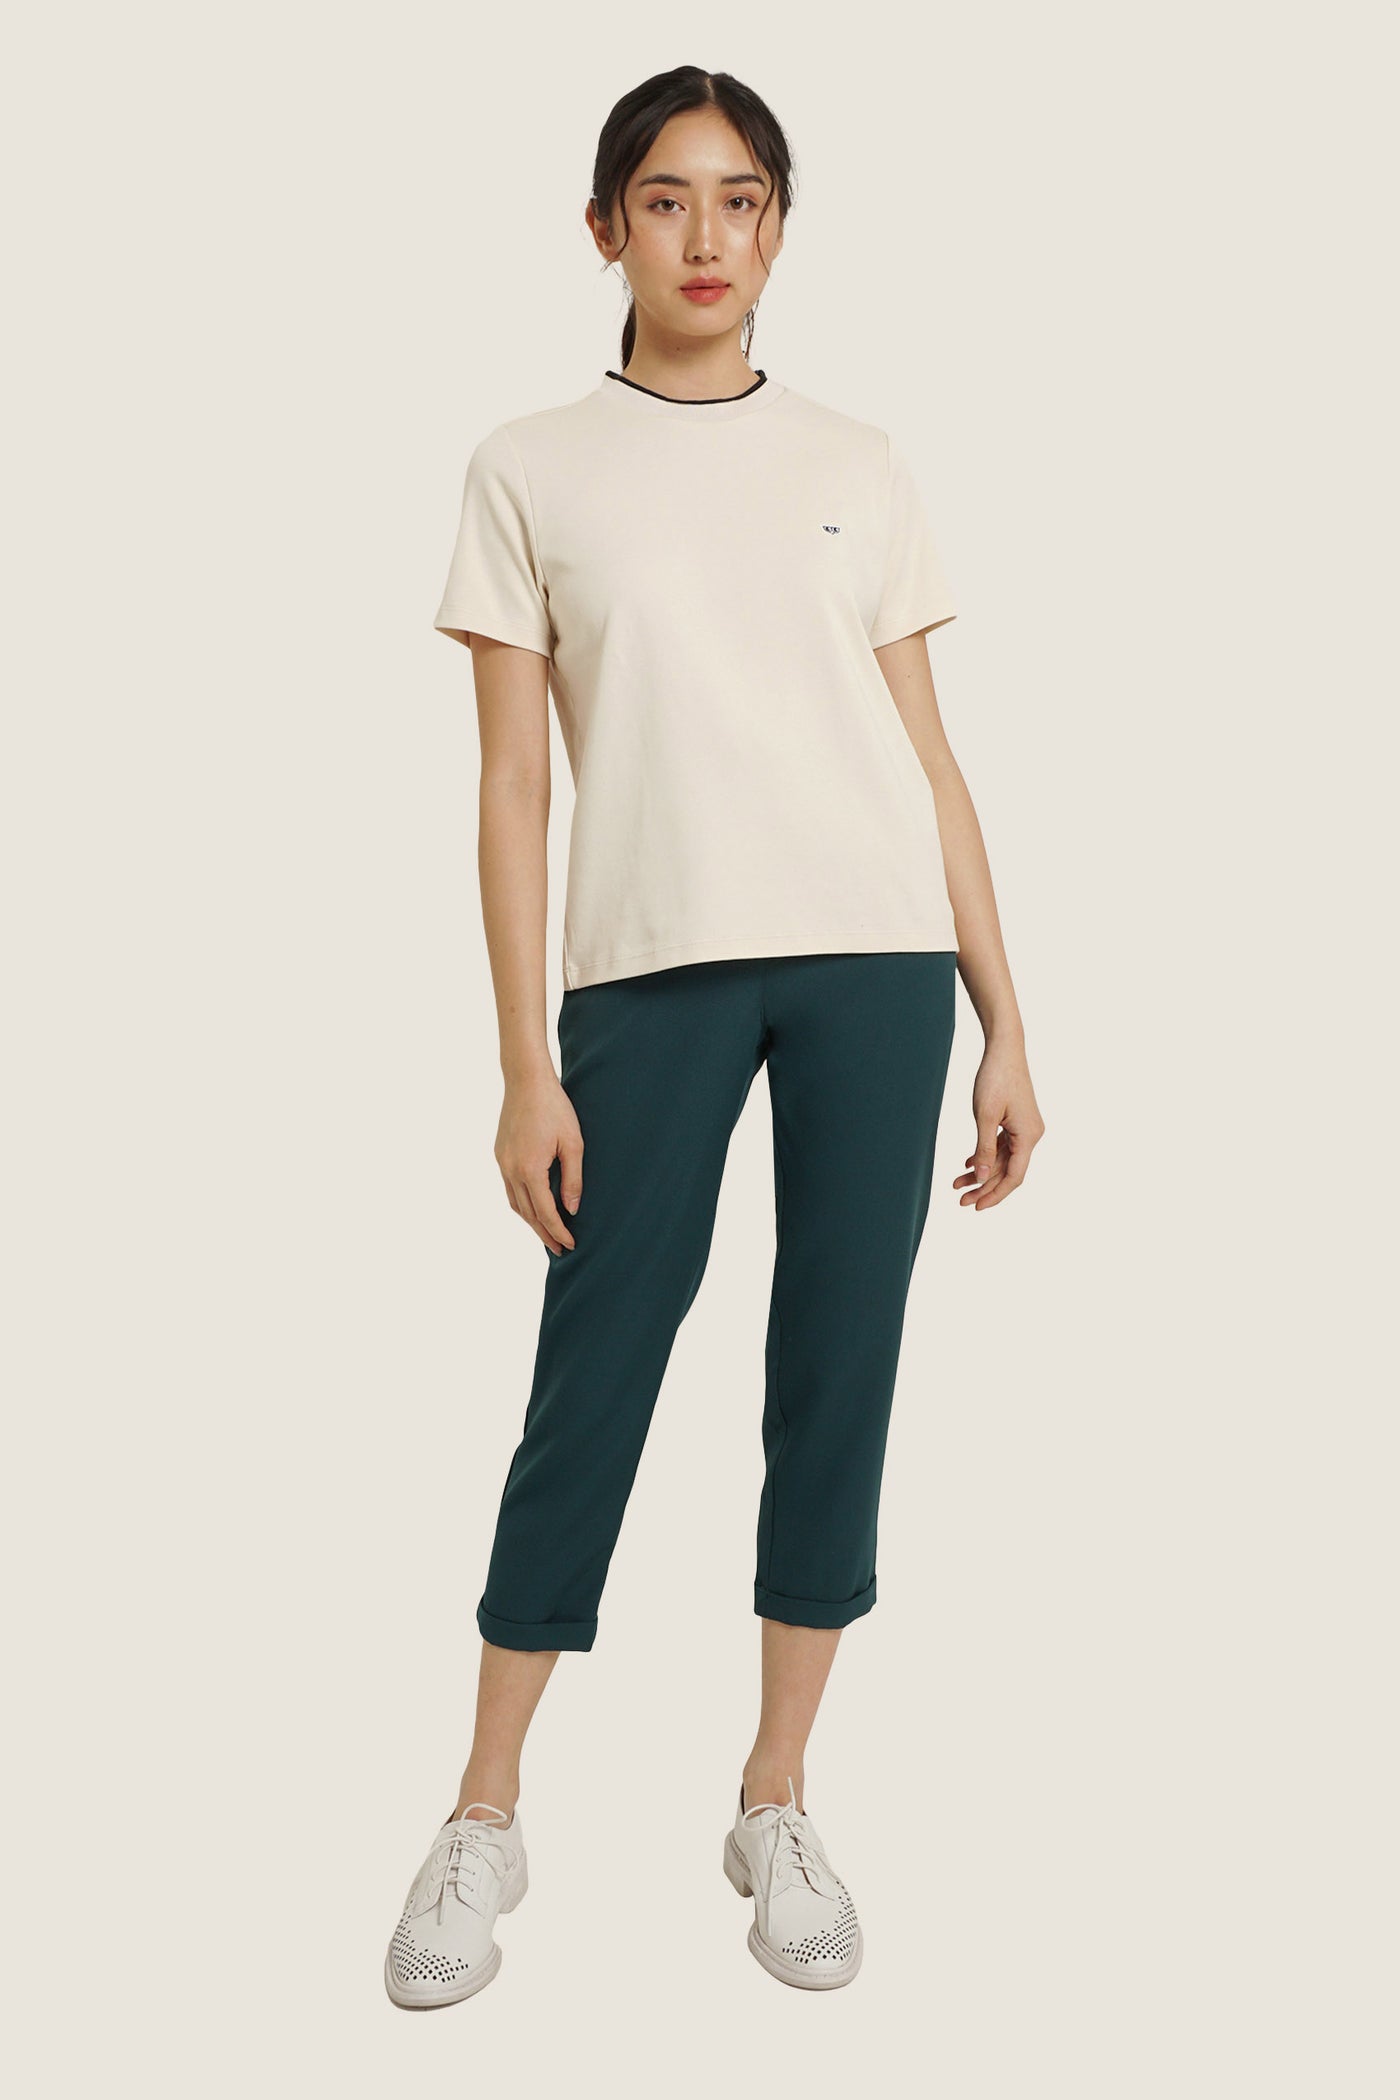 Ultimate Basics Tee With Contrast Tipping